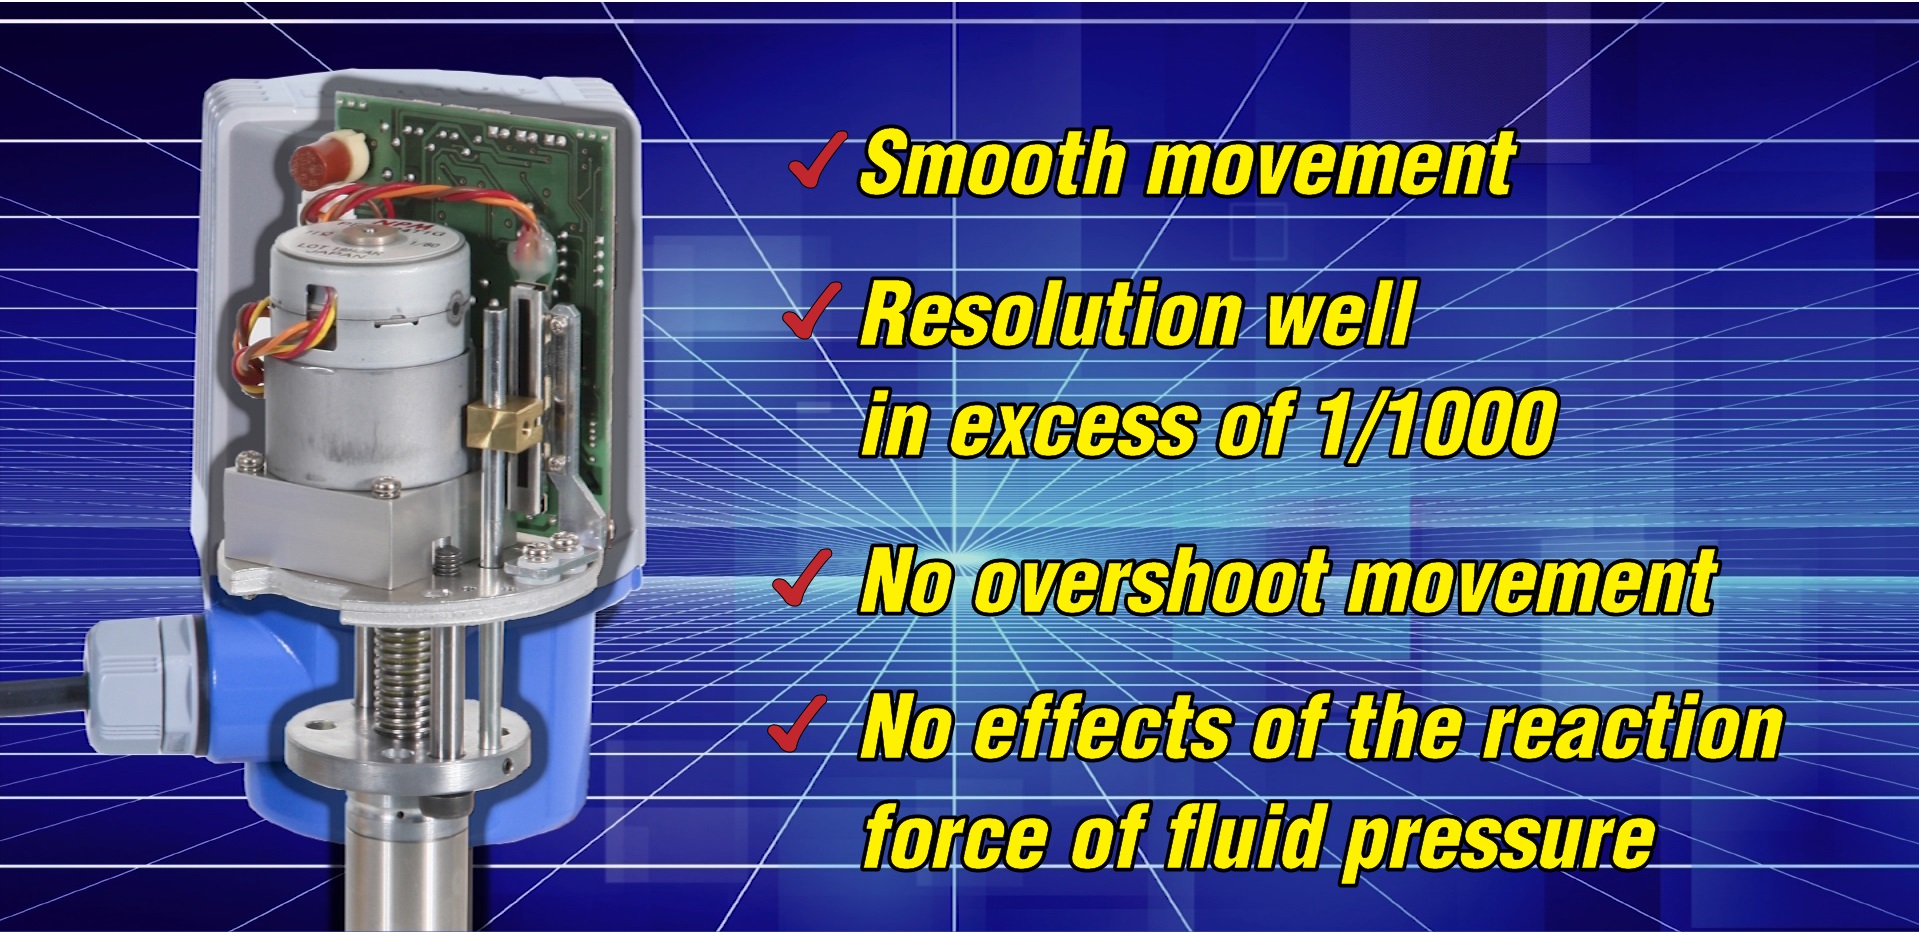 smooth movement. resolution well in excess of 1/1000. no overshoot movement. no effects of the reaction force of the reaction force of fluid pressure.